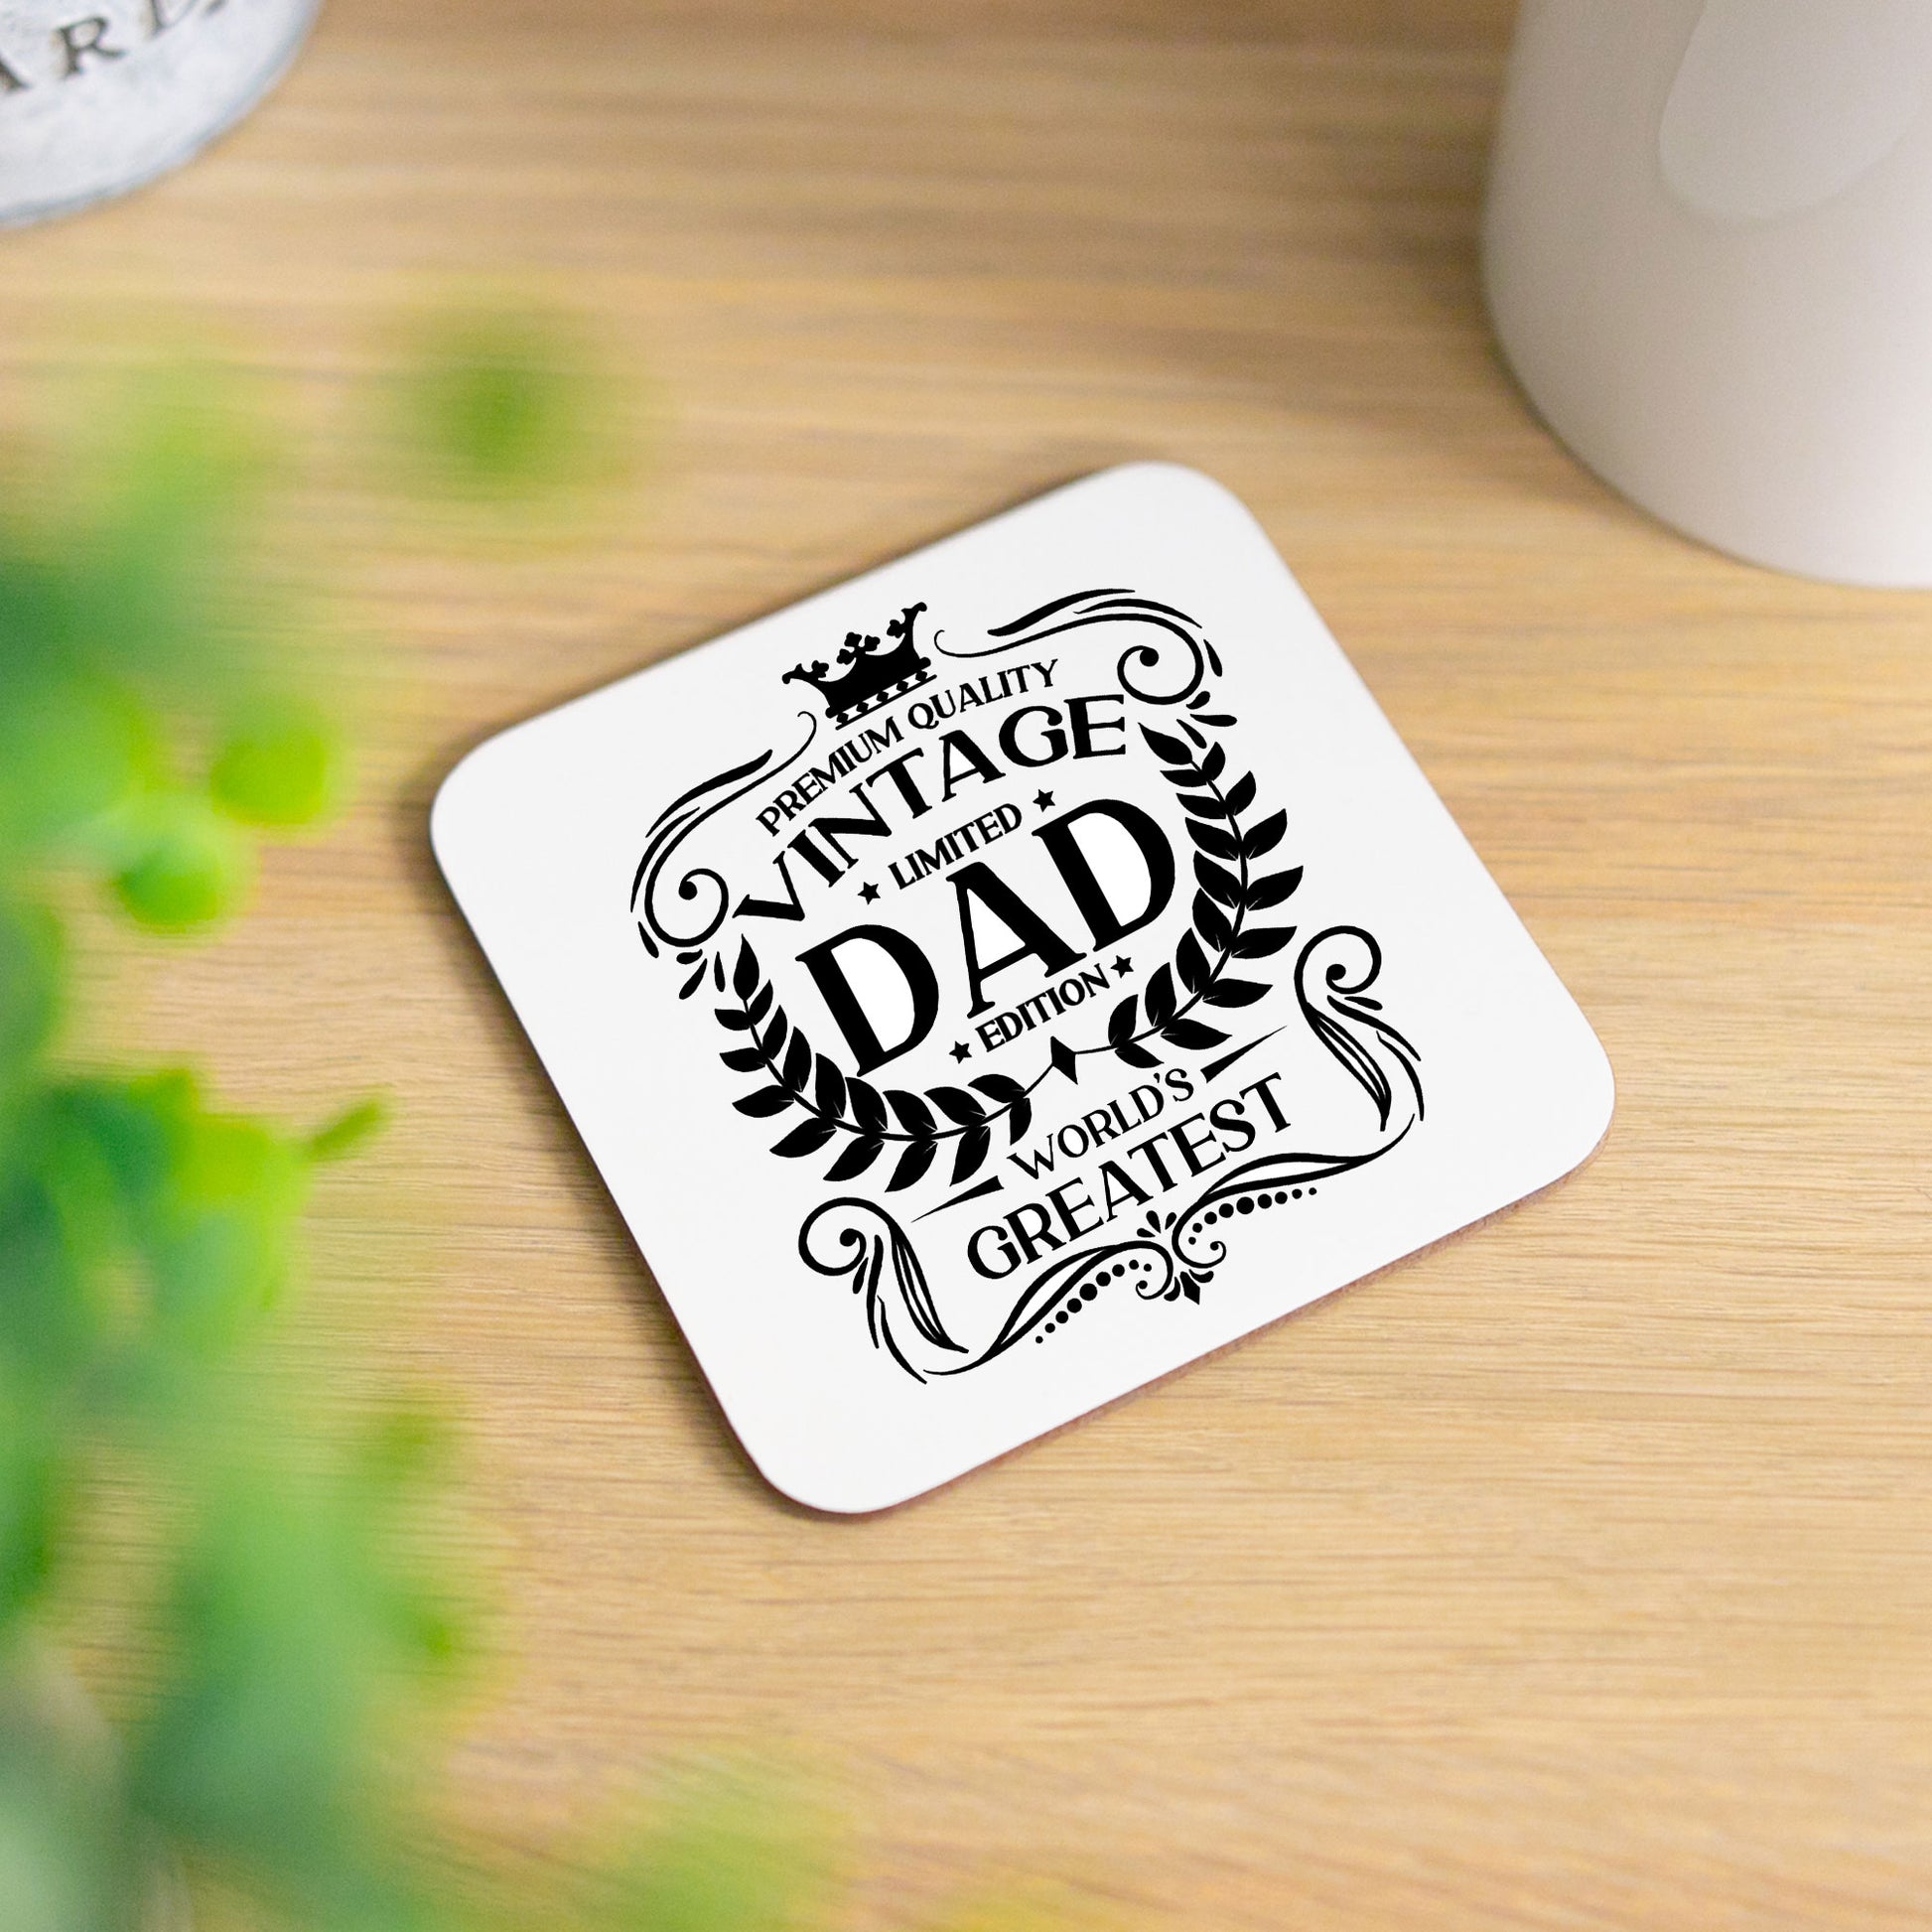 Vintage World's Greatest Dad Engraved Wine Glass Gift  - Always Looking Good - Glass & Printed Coaster  